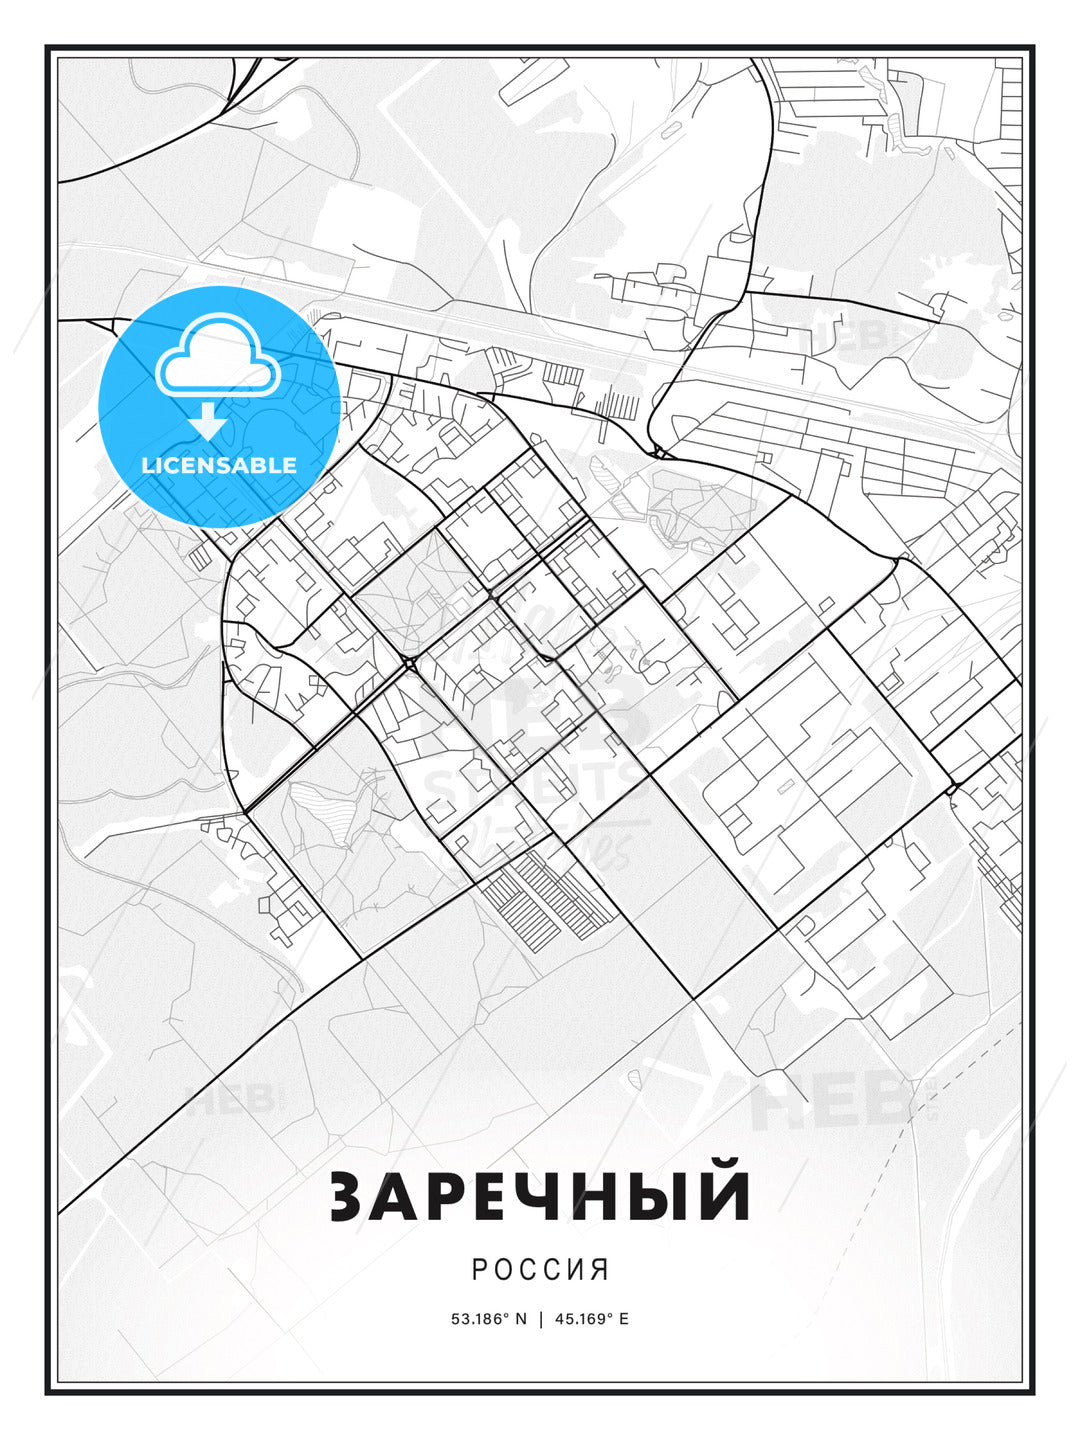 ЗАРЕЧНЫЙ / Zarechny, Russia, Modern Print Template in Various Formats - HEBSTREITS Sketches